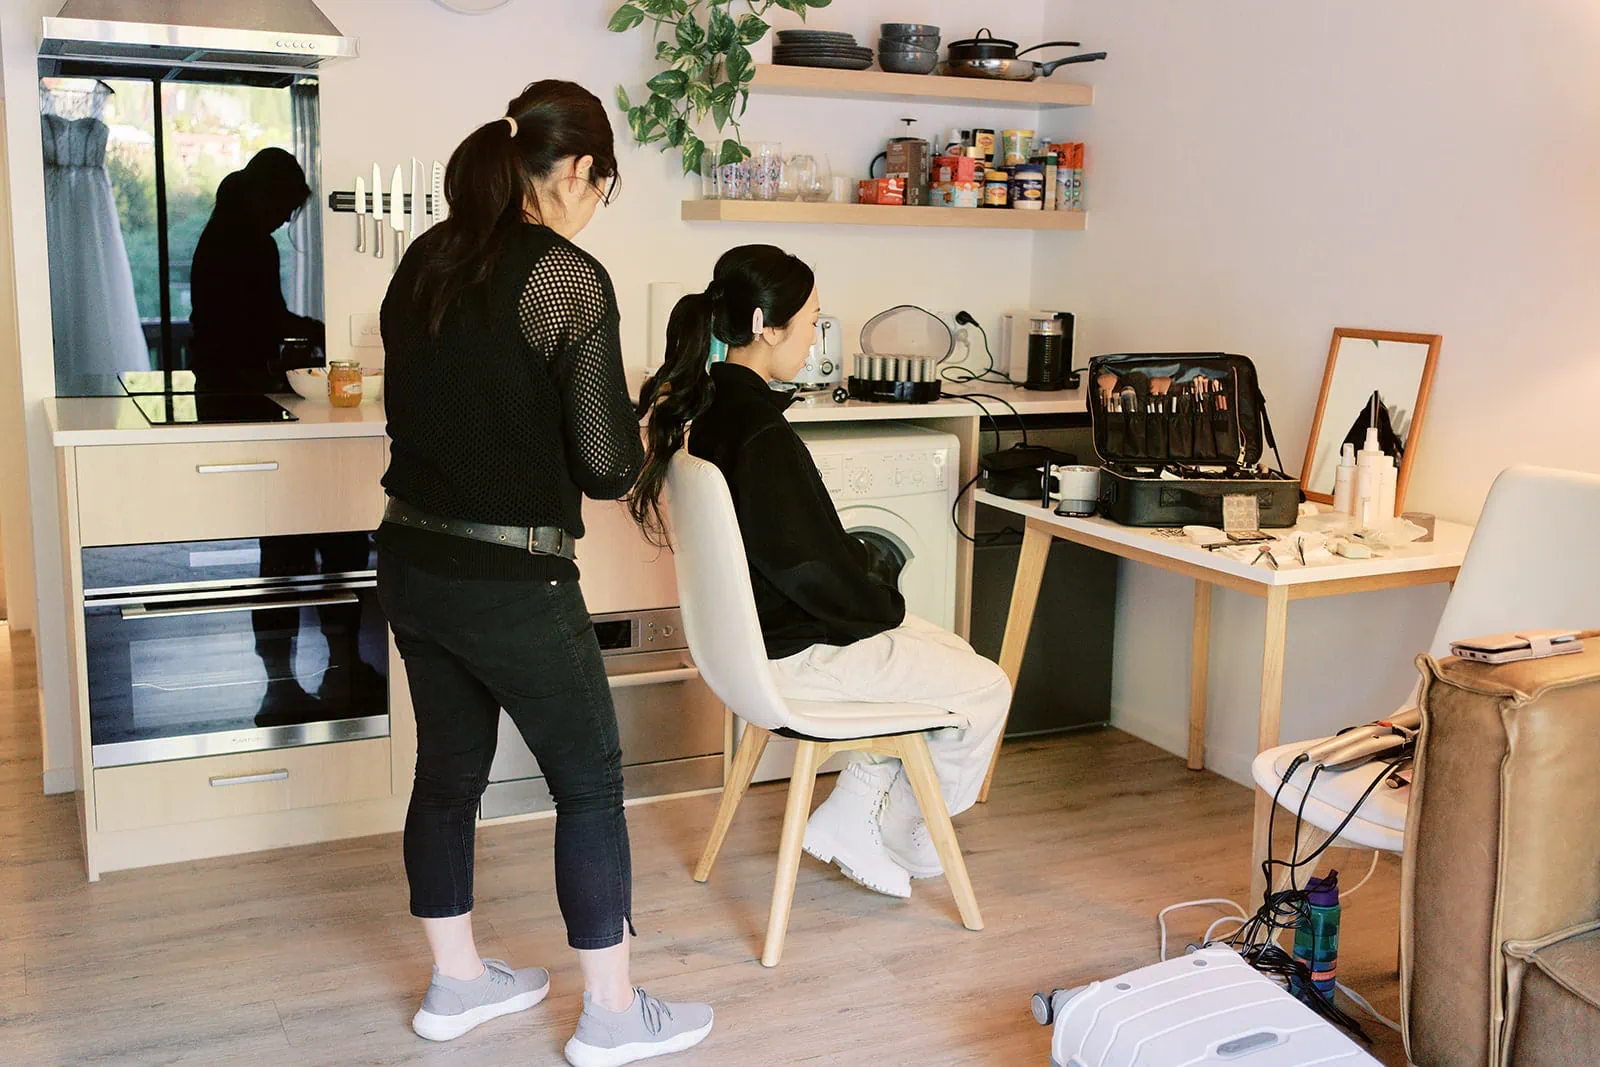 Queenstown Elopement Heli Wedding Photographer クイーンズタウン結婚式 | A woman is getting her hair done in preparation for a Heli Pre-Wedding photoshoot.